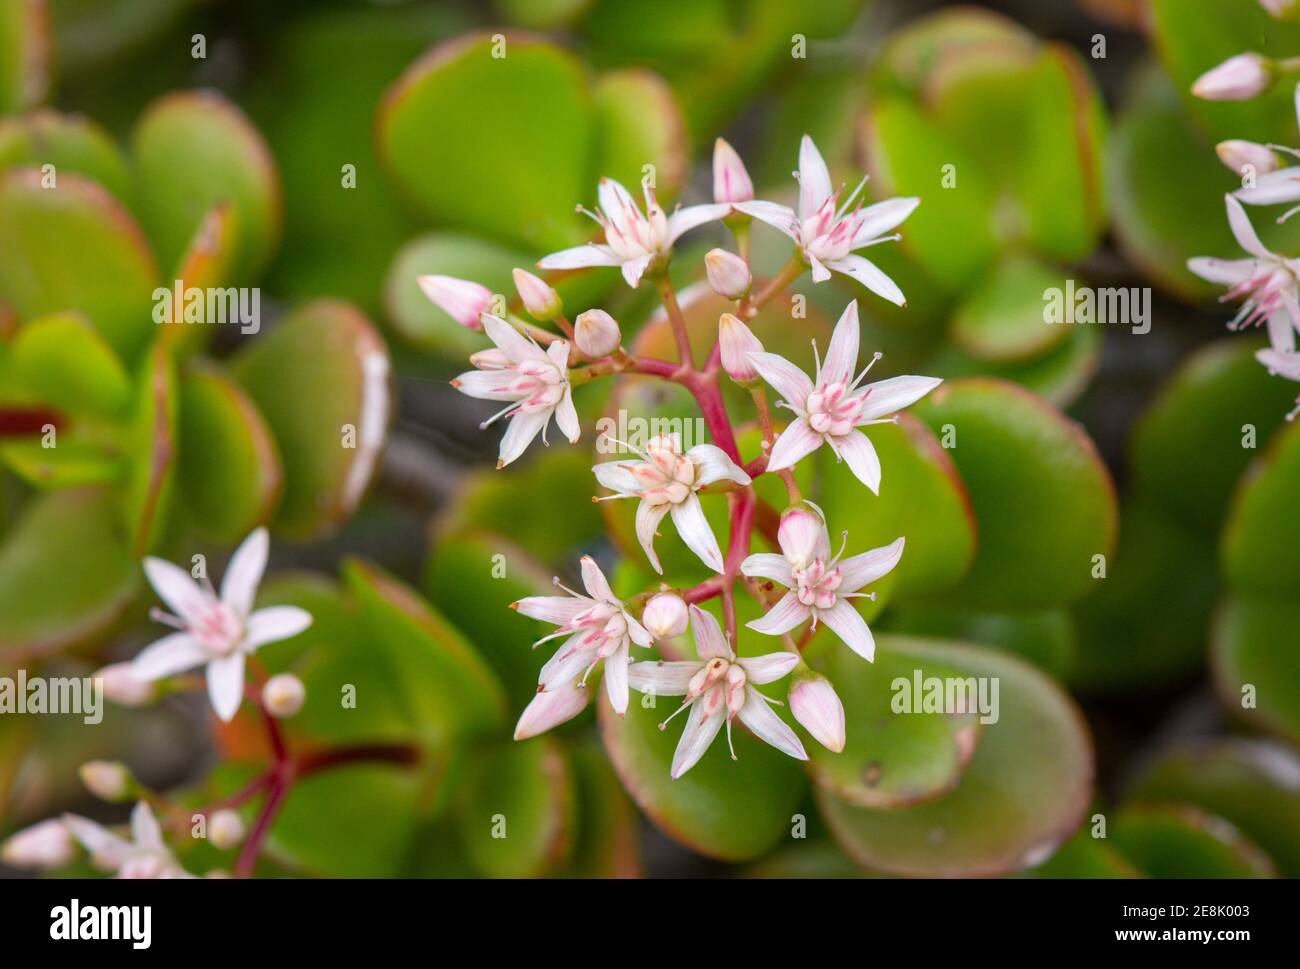 Flowers of Jade plant, Crassula ovata, succulent plant growing in a garden. Spain Stock Photo